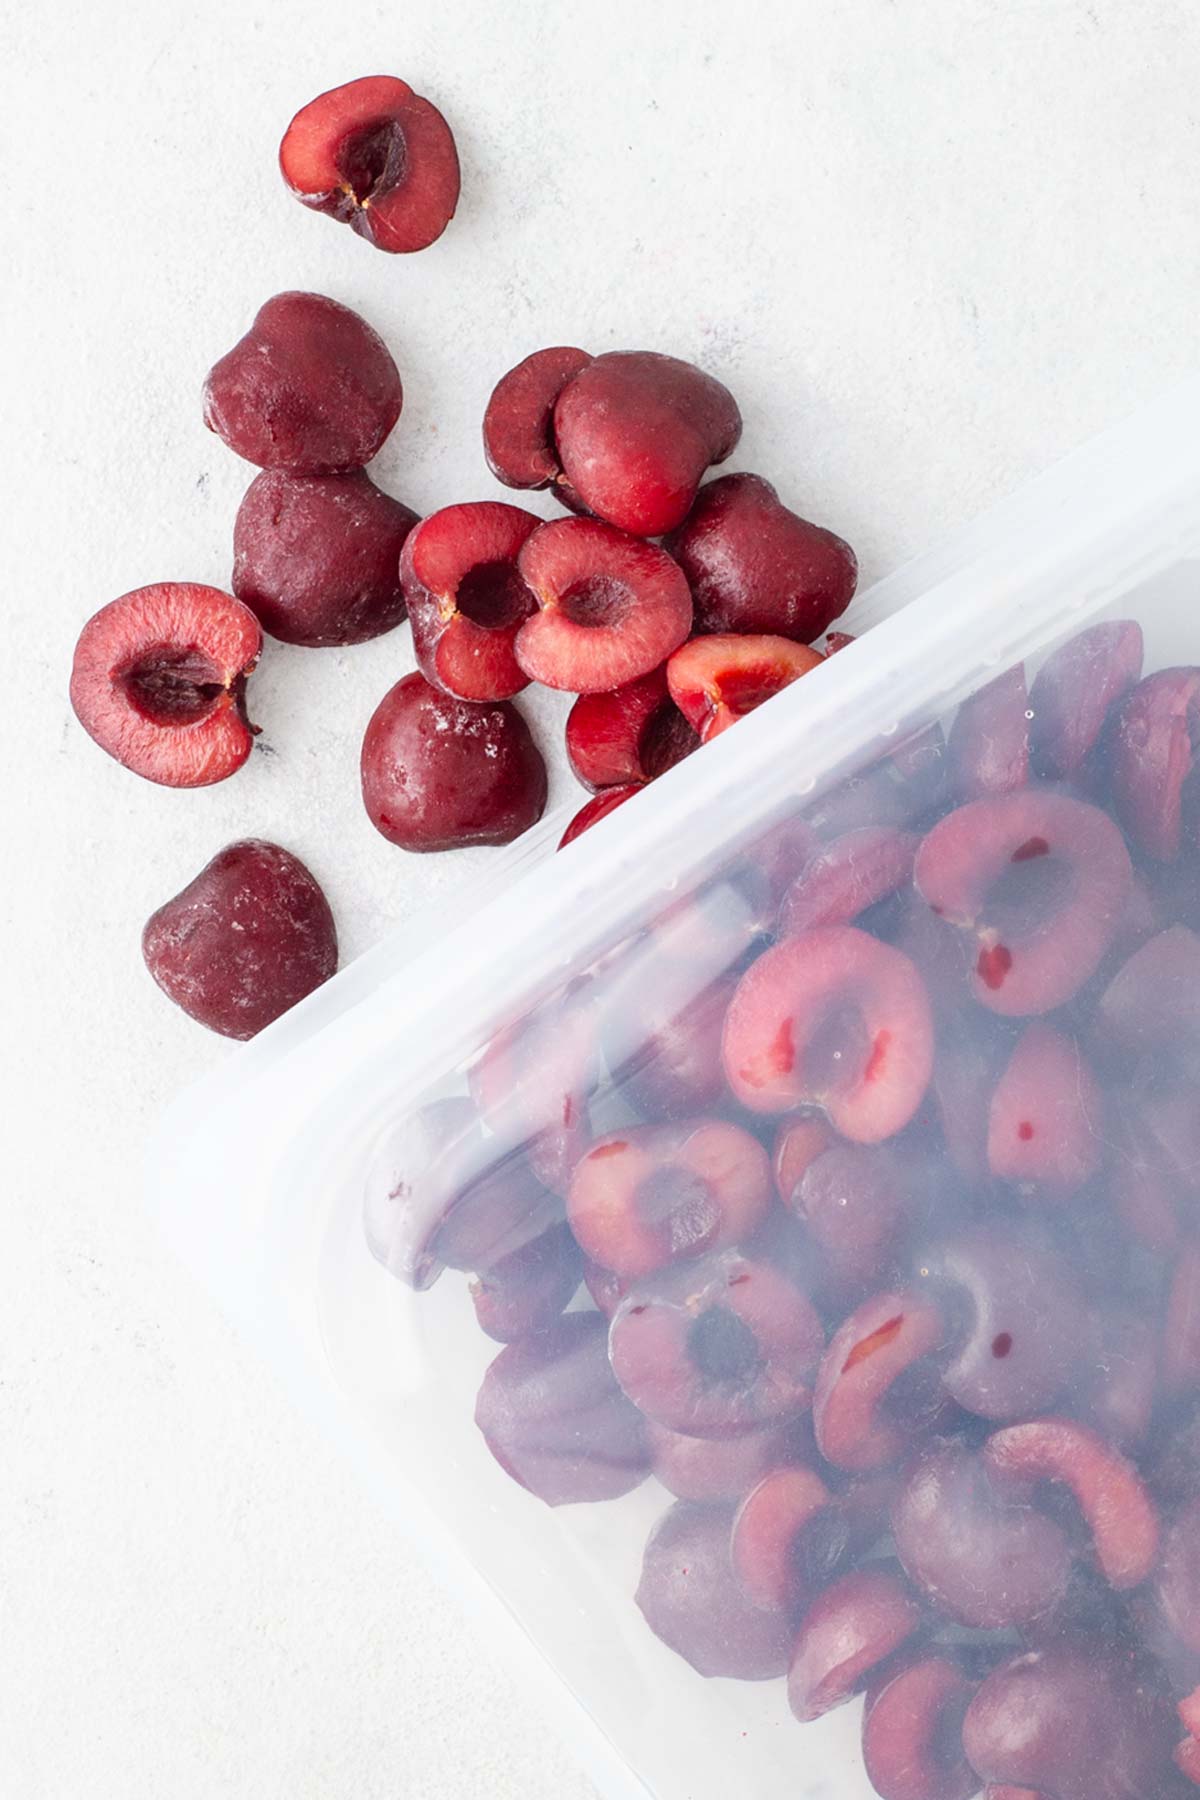 Frozen cherries in a silicone bag.